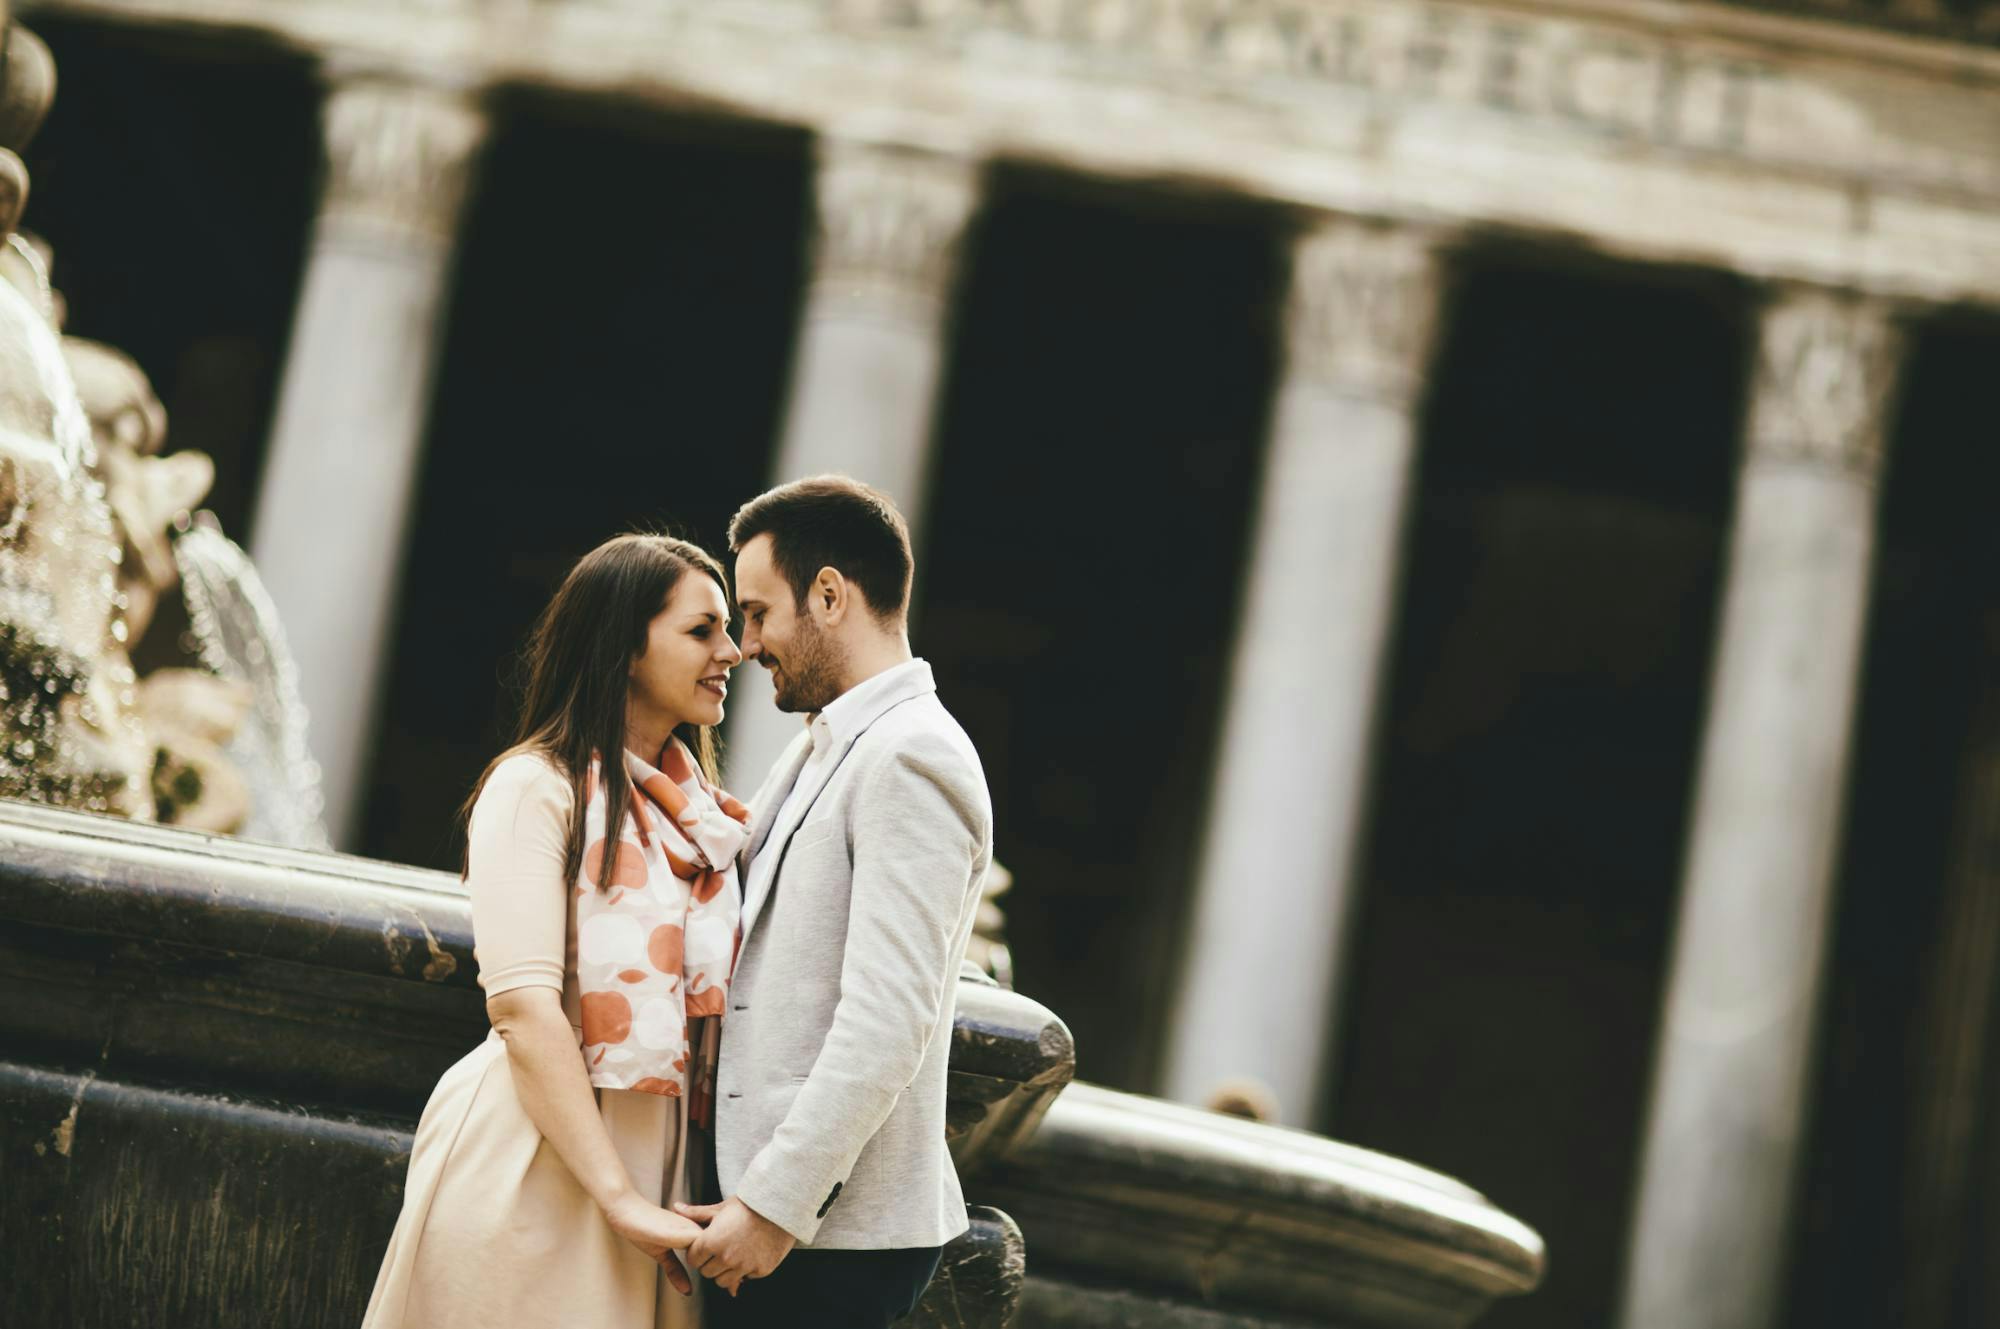 Private Photoshoot in Rome